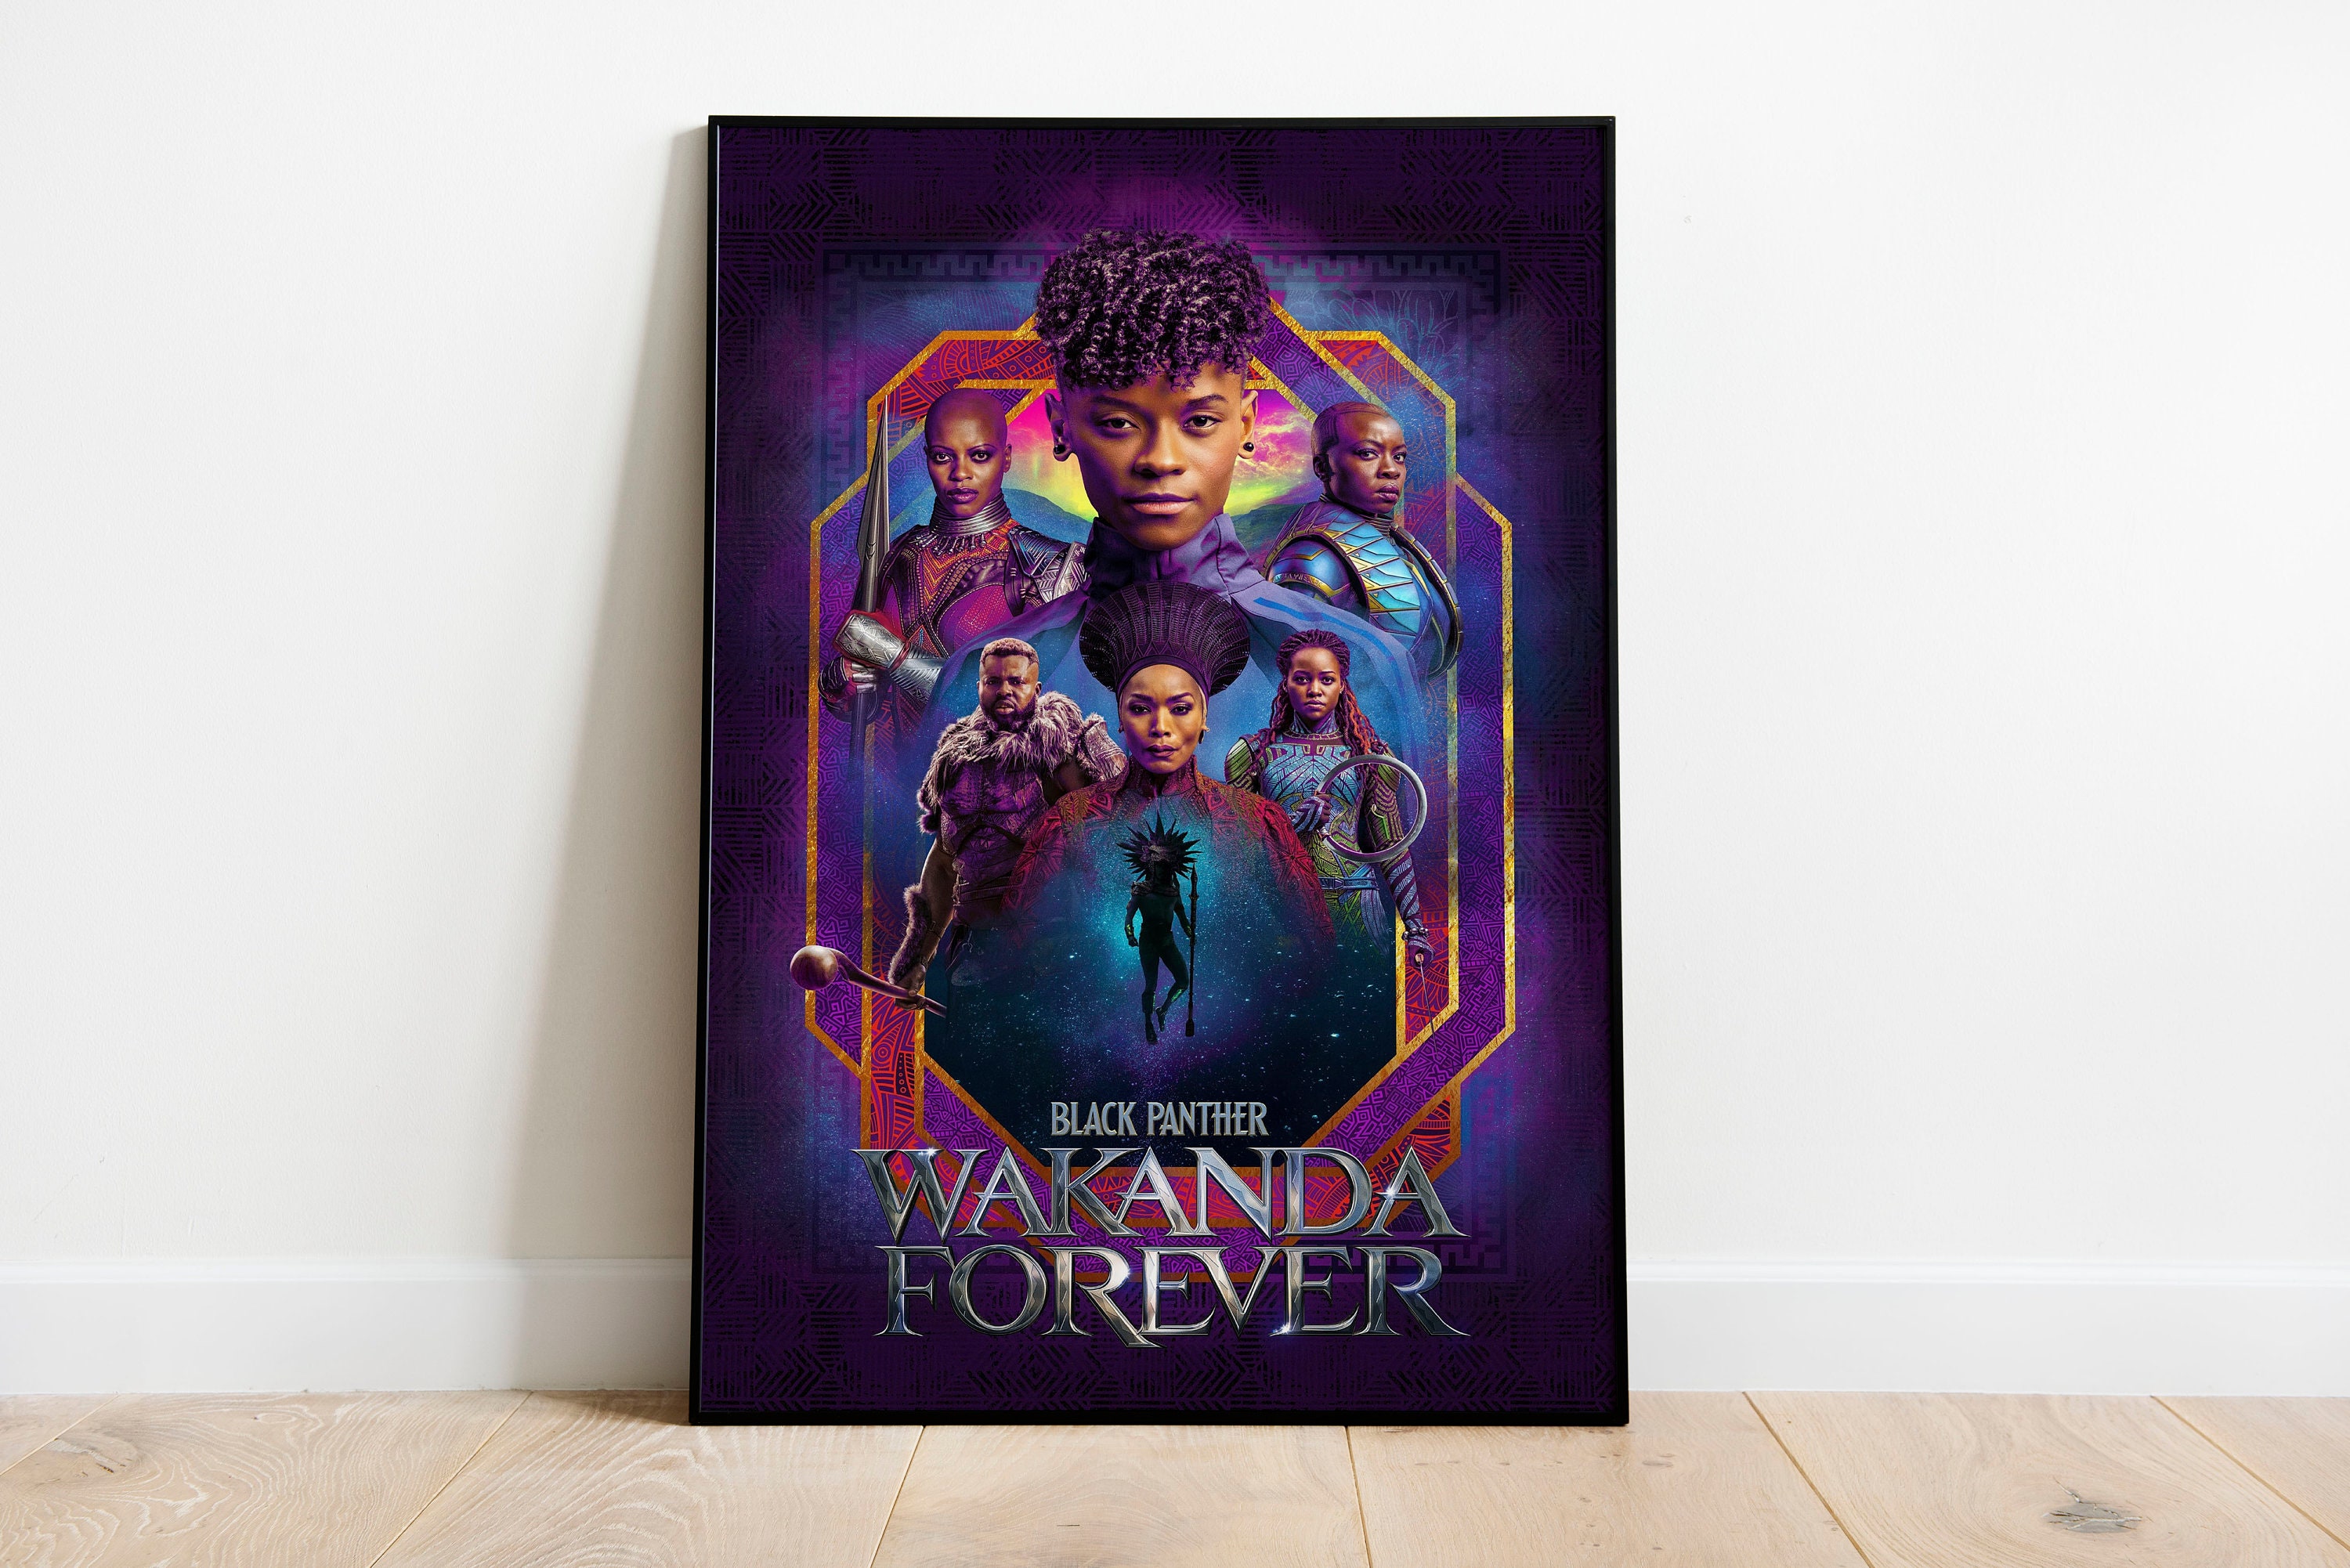 Black Panther 2 Wakanda Forever Movie Poster